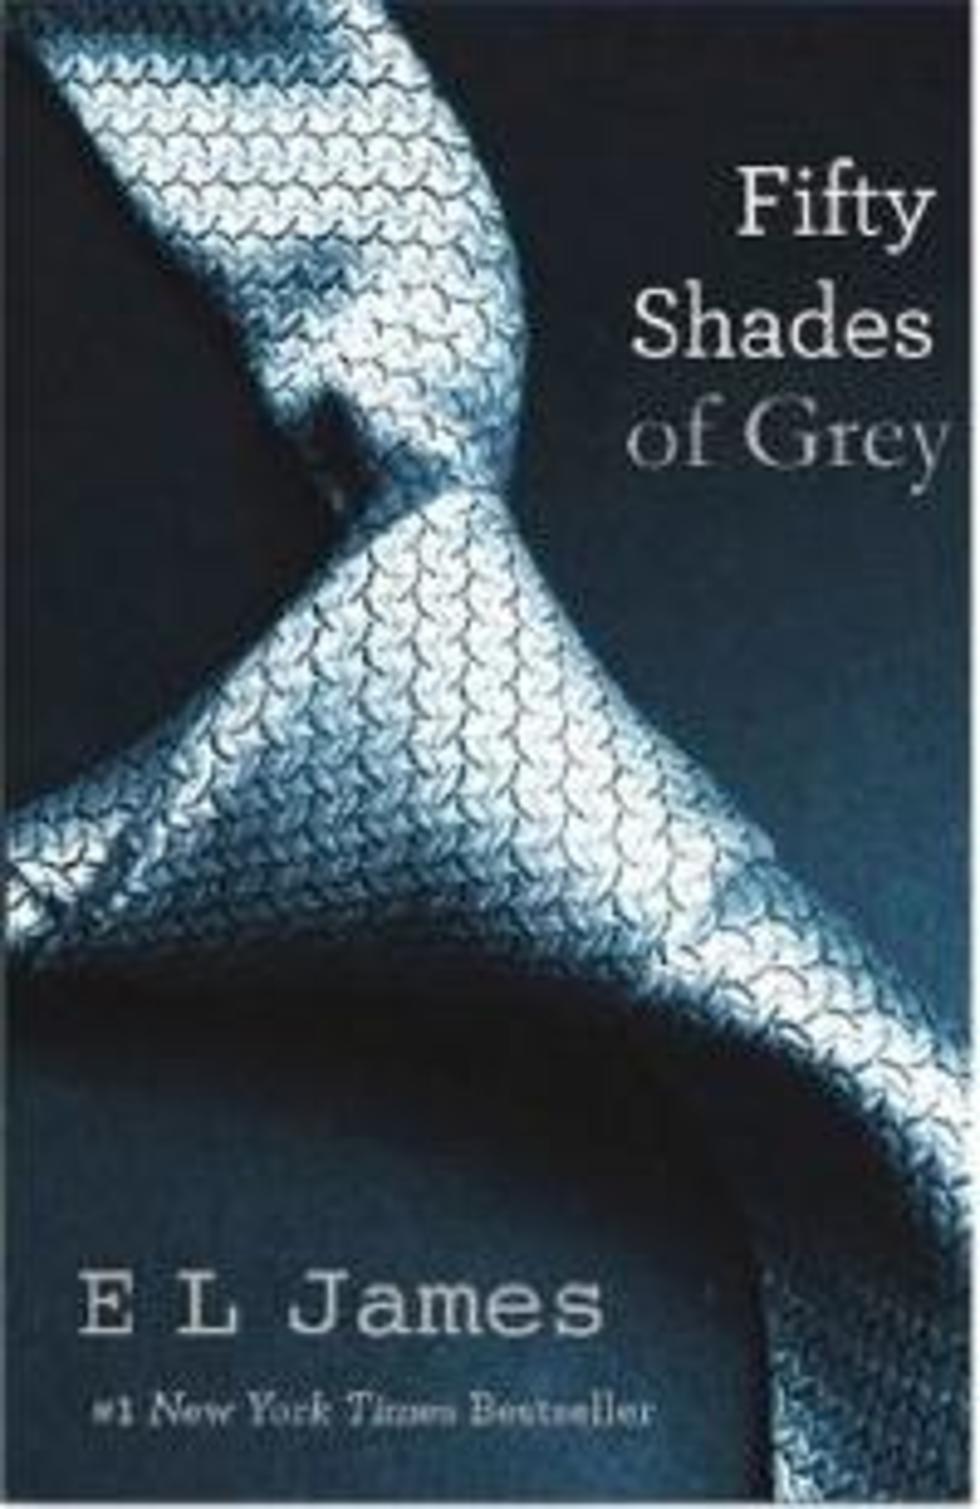 has fifty shades of grey changed things in your bedroom?